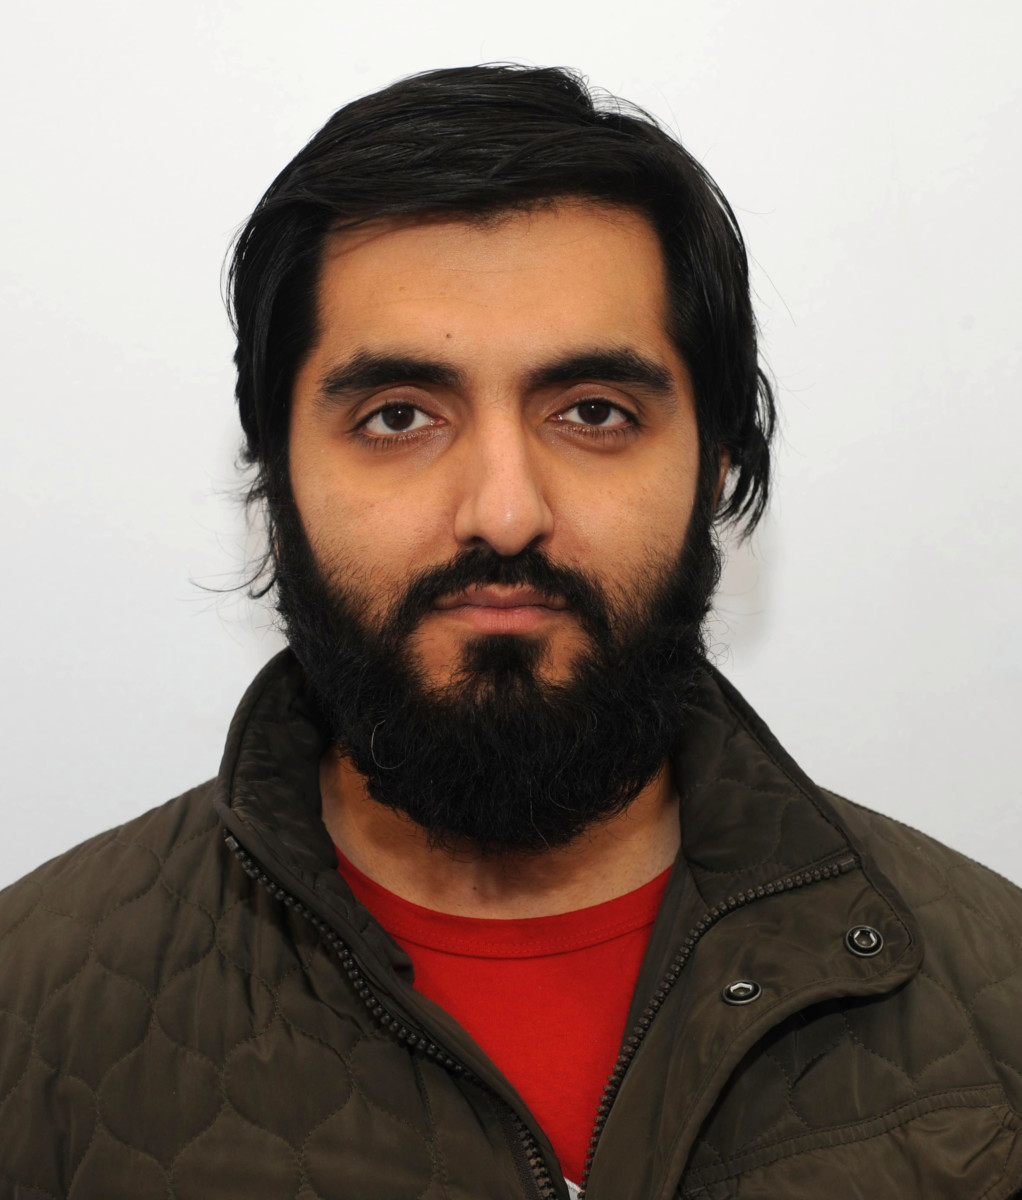 Jamshed Javeed was jailed for six years in March 2015 for planning to travel from his Manchester home to Syria to join IS